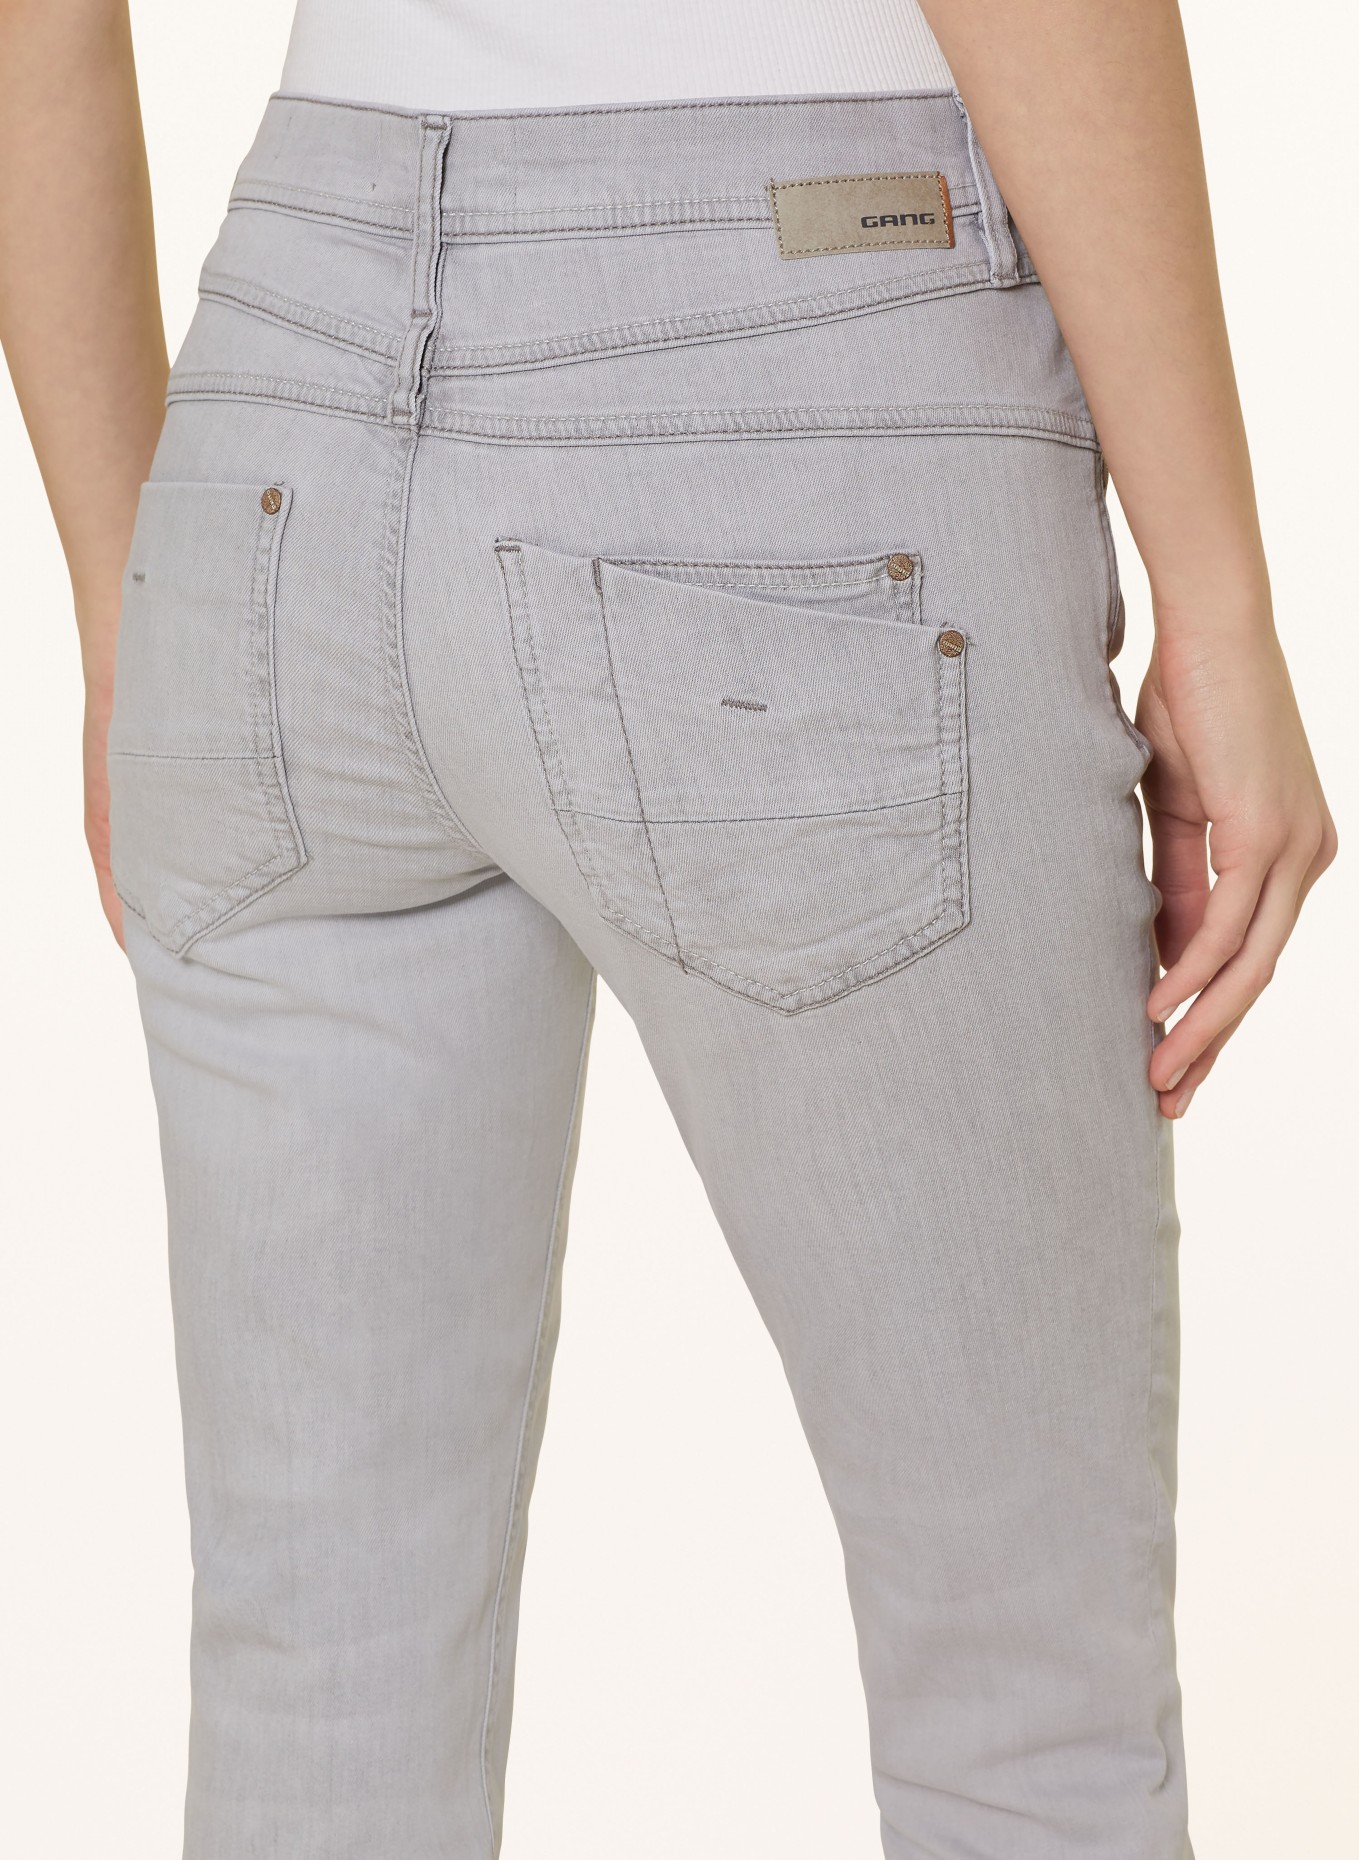 GANG 7/8-Jeans AMELIE CROPPED, Farbe: 7108 clowdy gray (Bild 5)